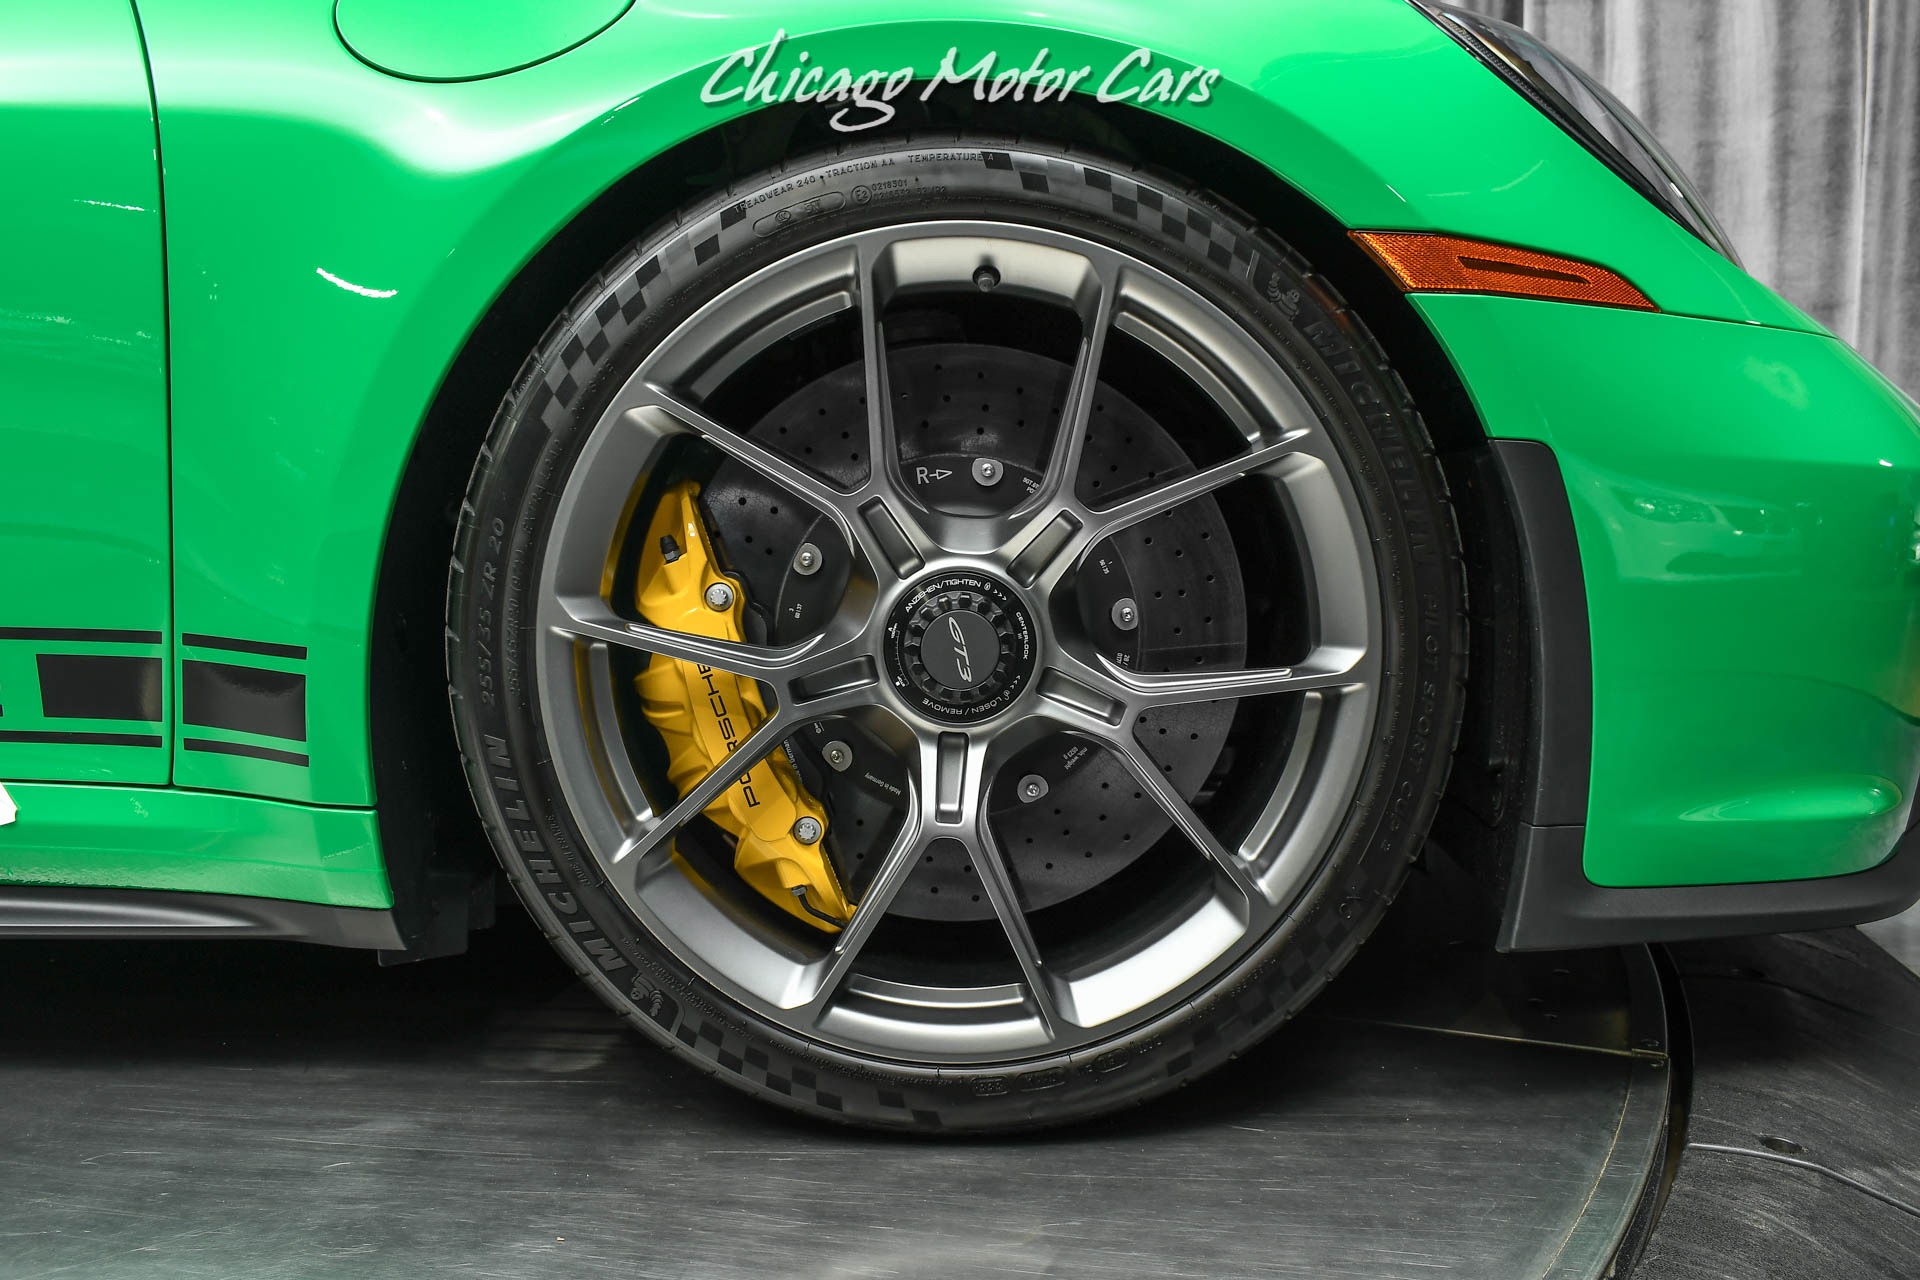 Used-2022-Porsche-911-GT3-Python-Green-Amazing-Spec-HIGH-MSRP-Only-18-Miles-LOADED